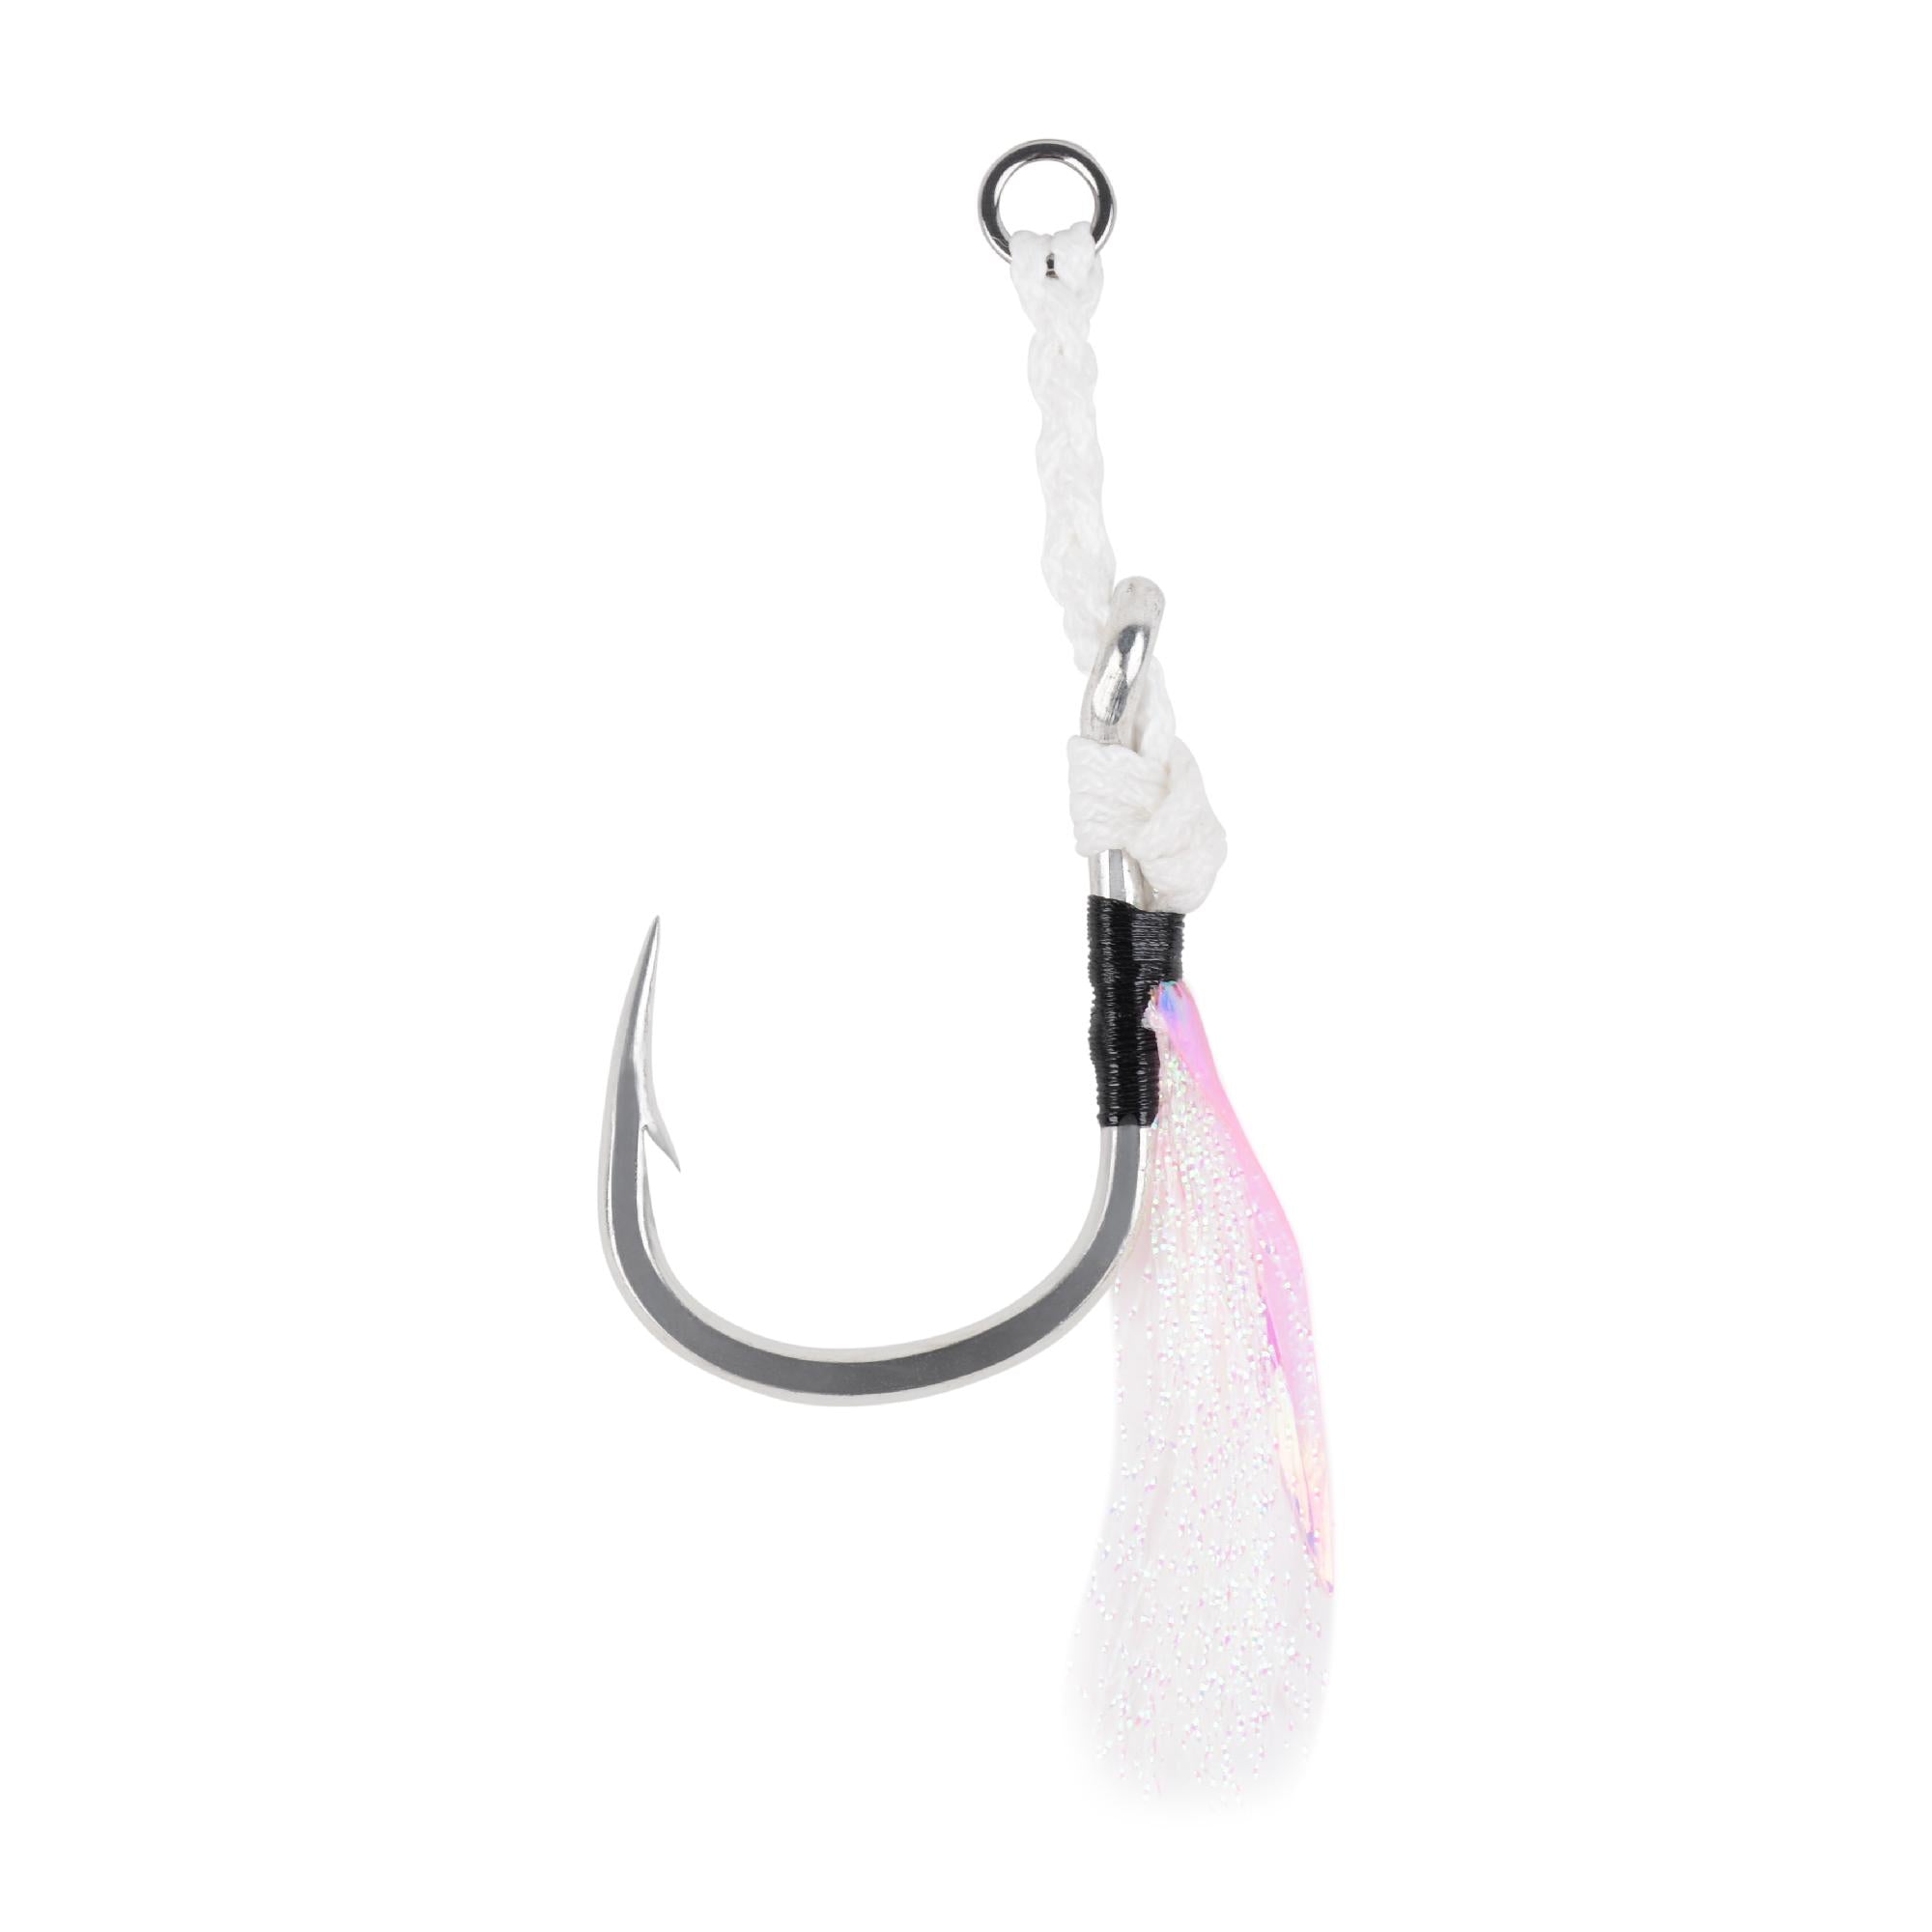 Mustad 10015NPBLN Trout Power Hooks (Size: 12, Pack: 10)  [MUST10015NPBLN:11383] - €1.79 : 24Tackle, Fishing Tackle Online Store